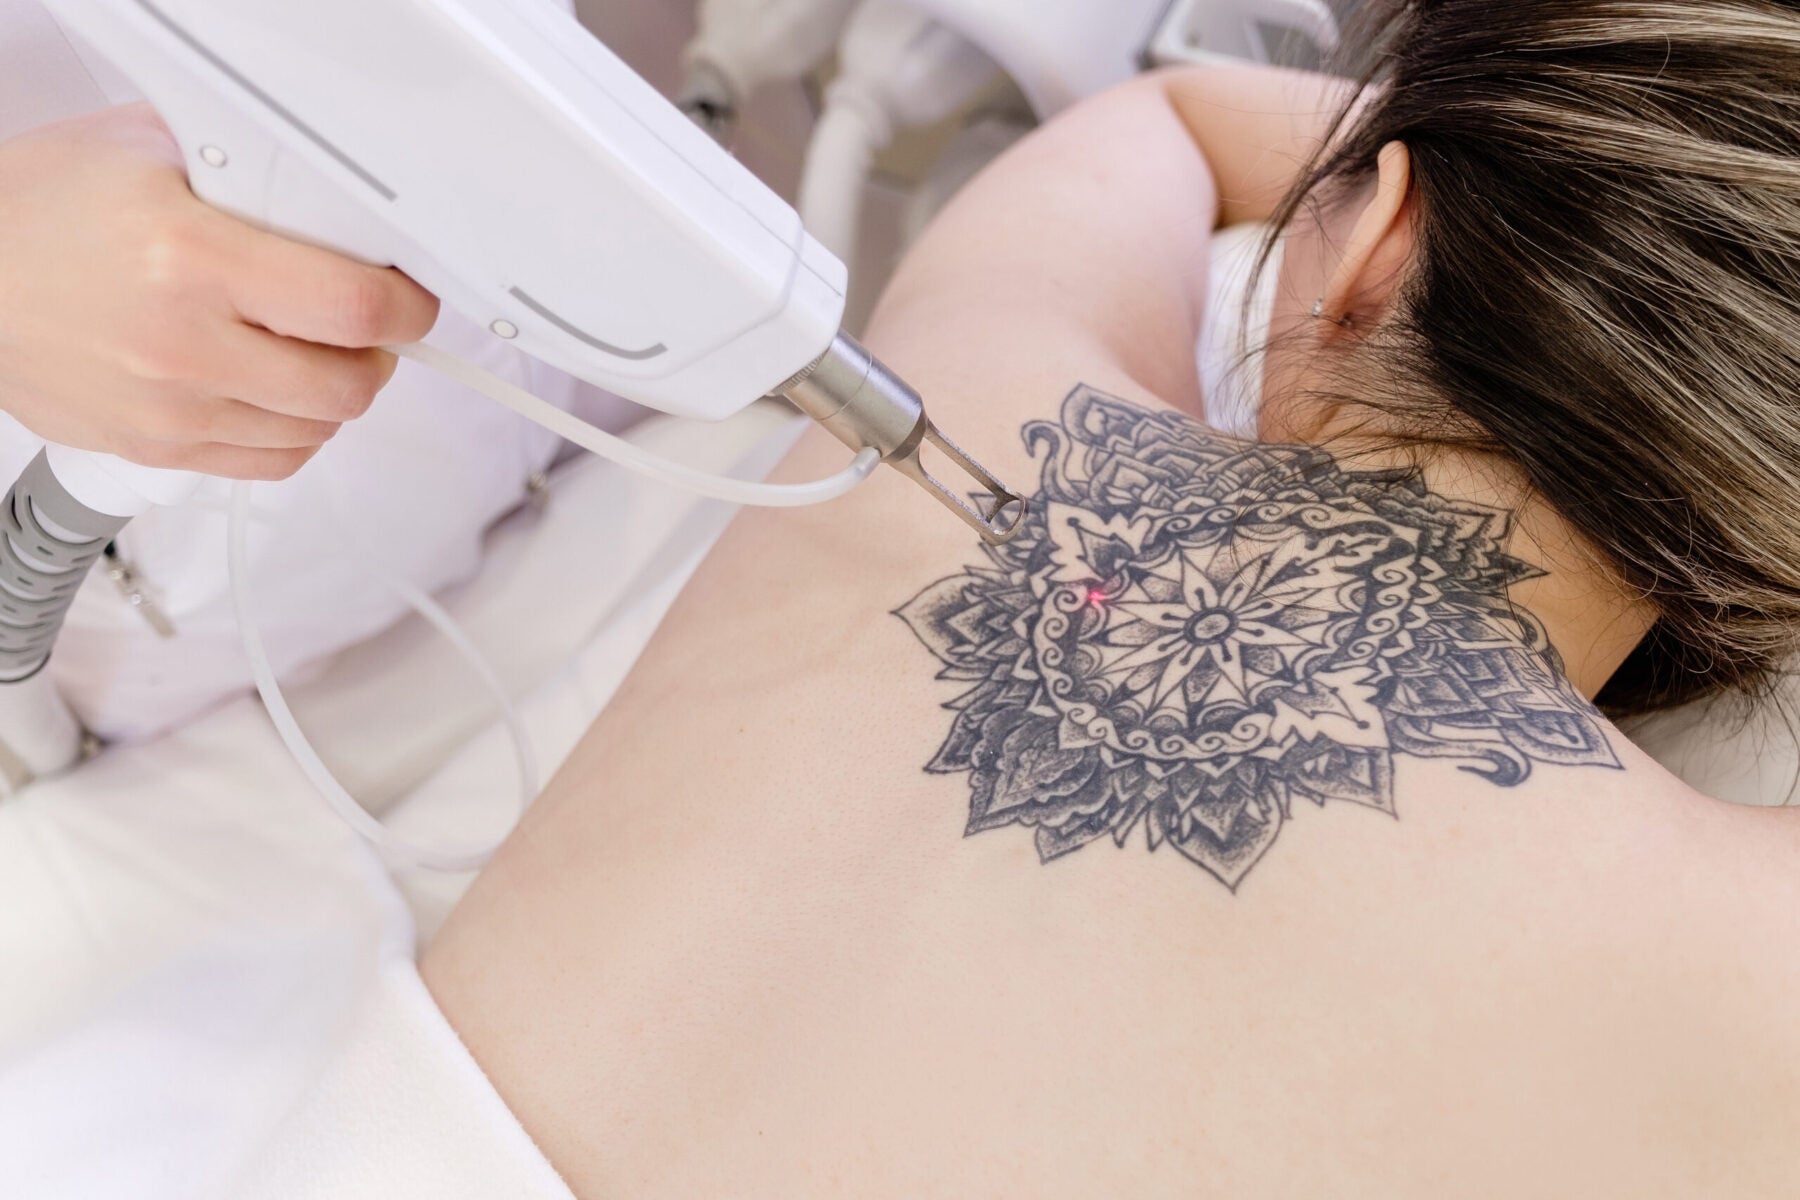 6 Possible Laser Tattoo Removal Side Effects and How to Deal with Them